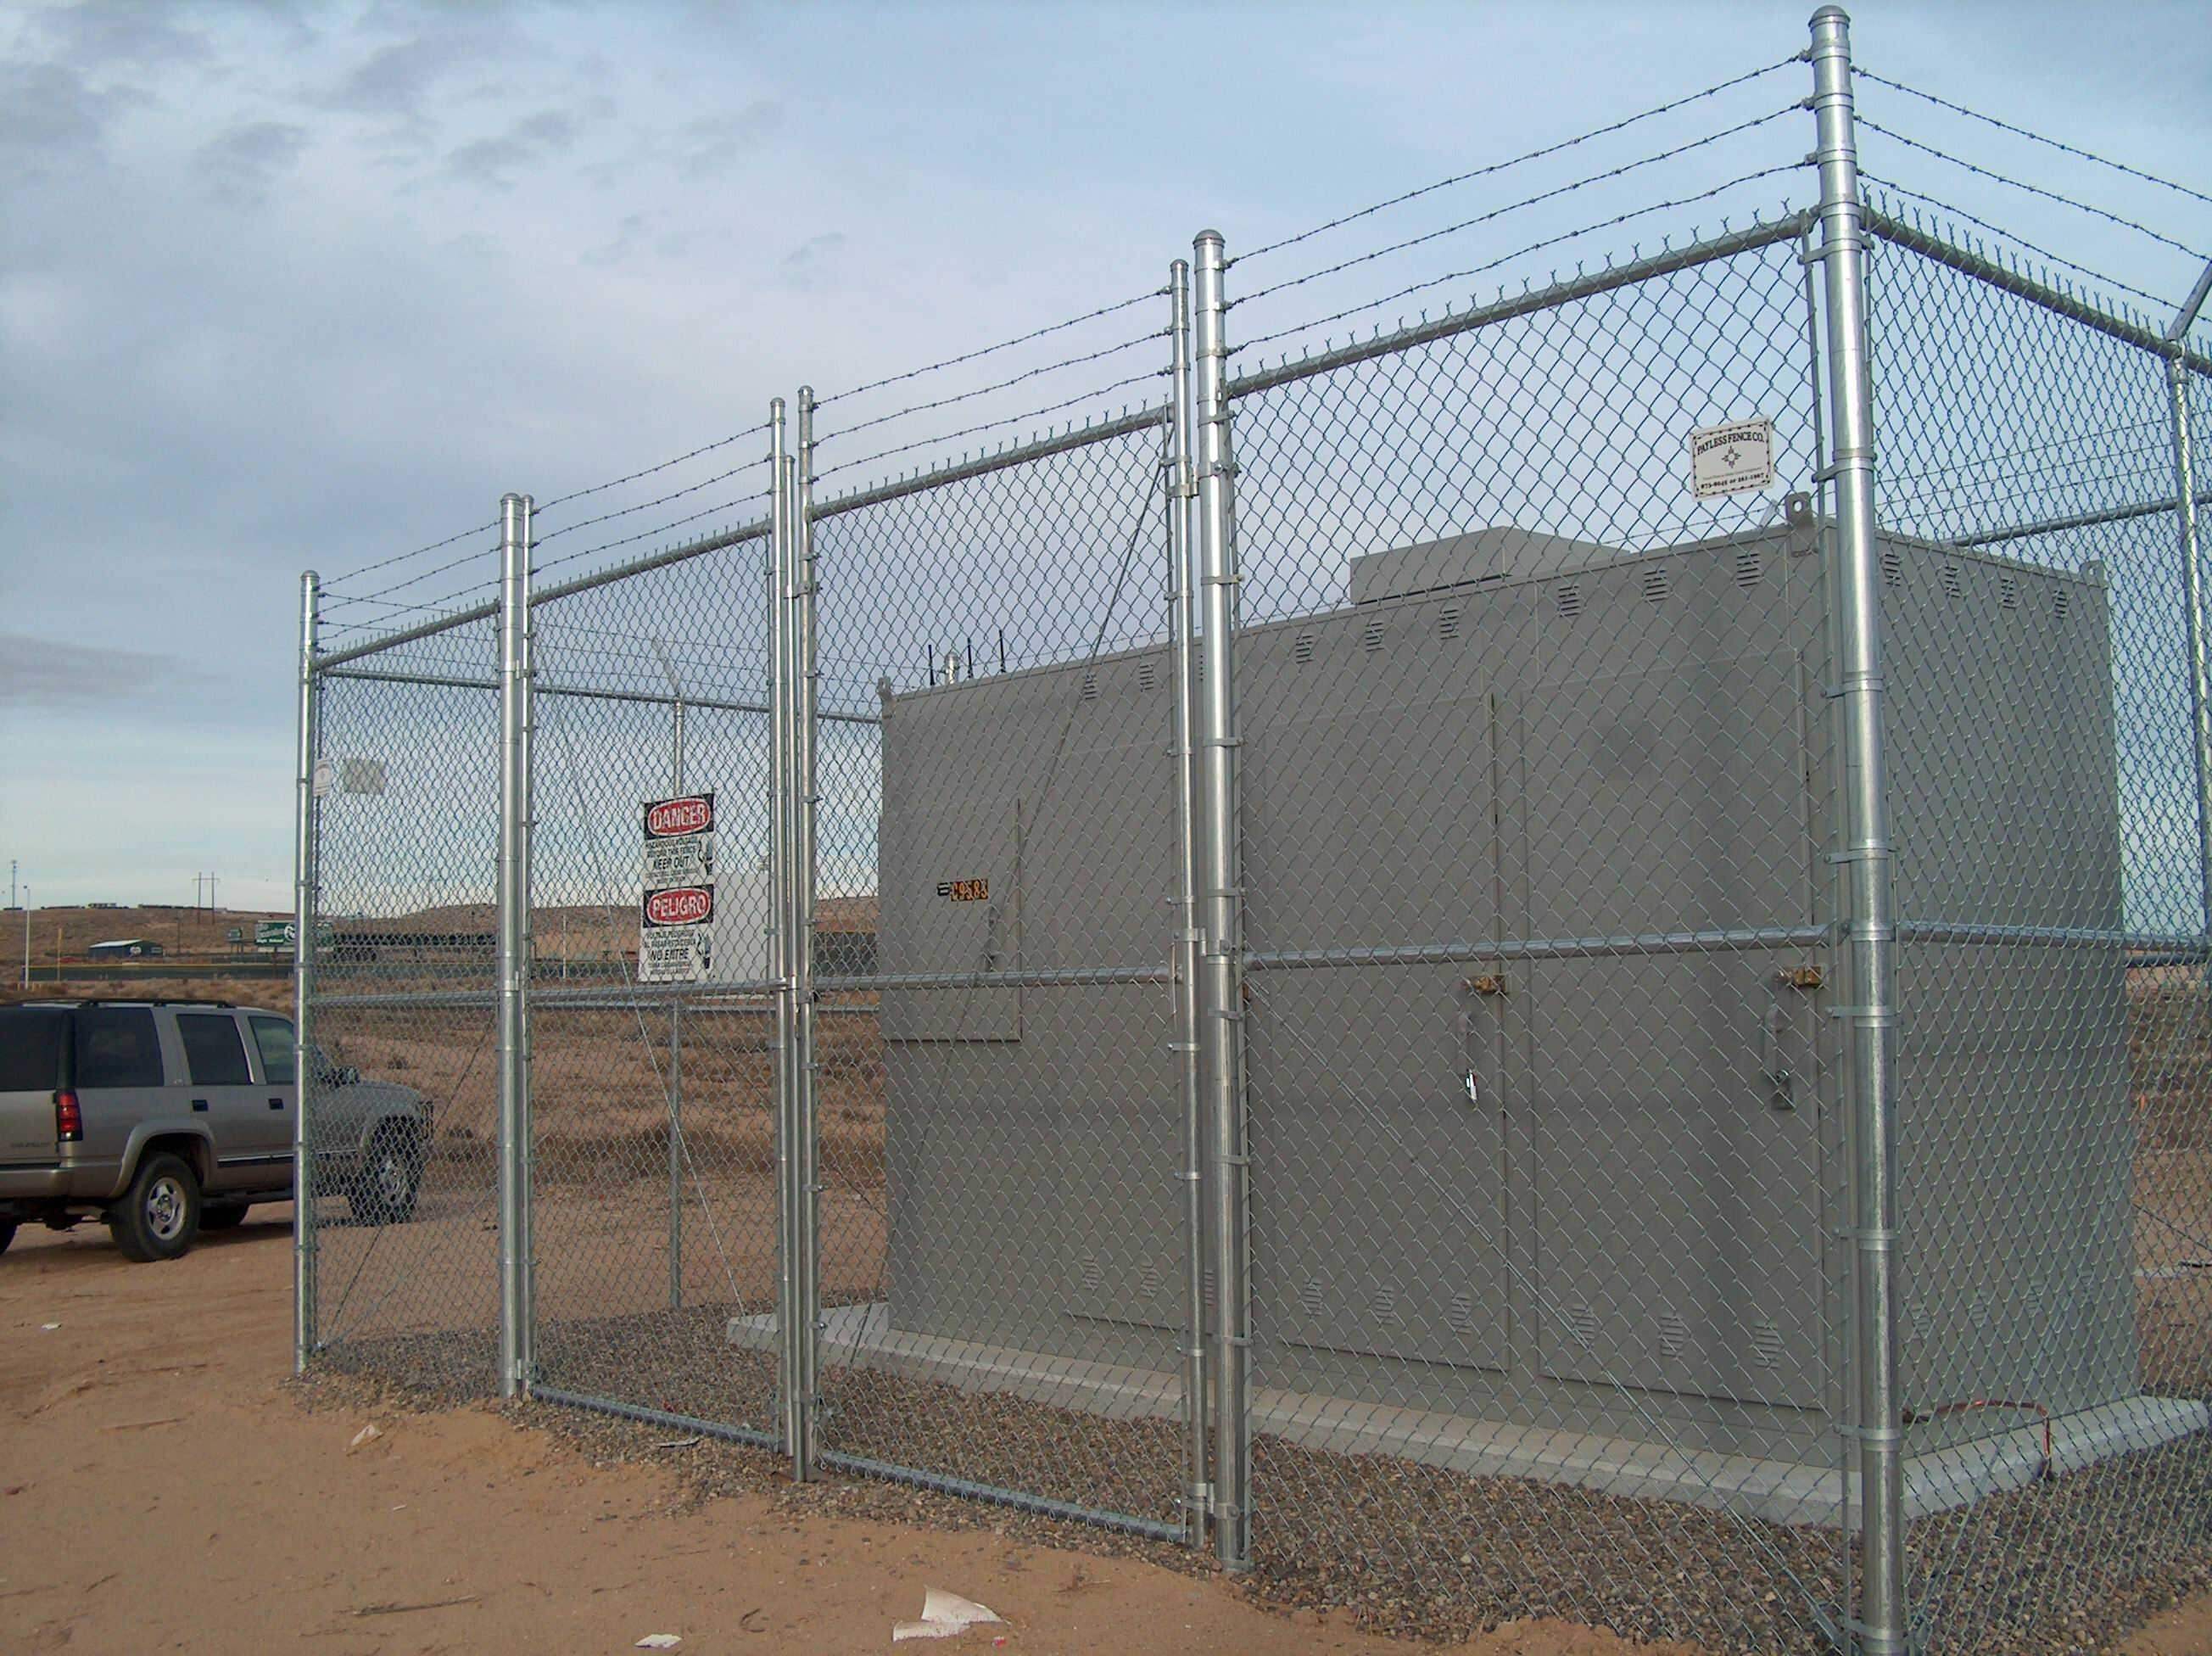 Sports Field Fence: Ensuring Safety and Boundaries